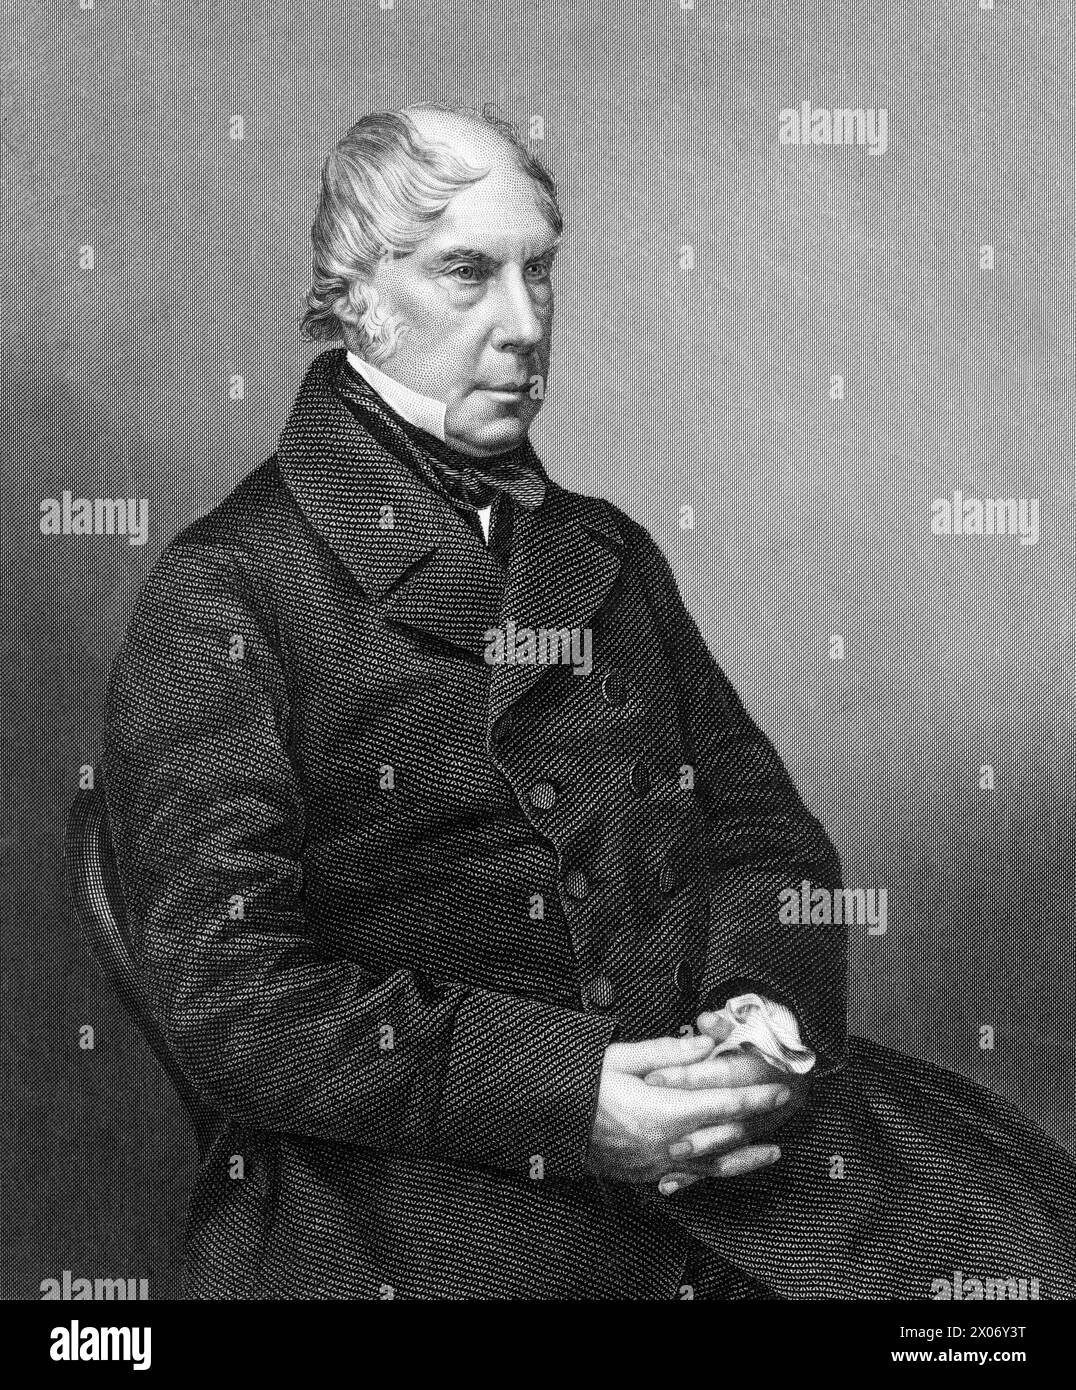 George Hamilton-Gordon, 4th Earl of Aberdeen (1784-1860), styled 'Lord Haddo', Prime Minister of the United Kingdom 1852-1855, steel portrait engraving by Daniel John Pound after a John Jabez Edwin Mayall photograph, circa 1860 Stock Photo